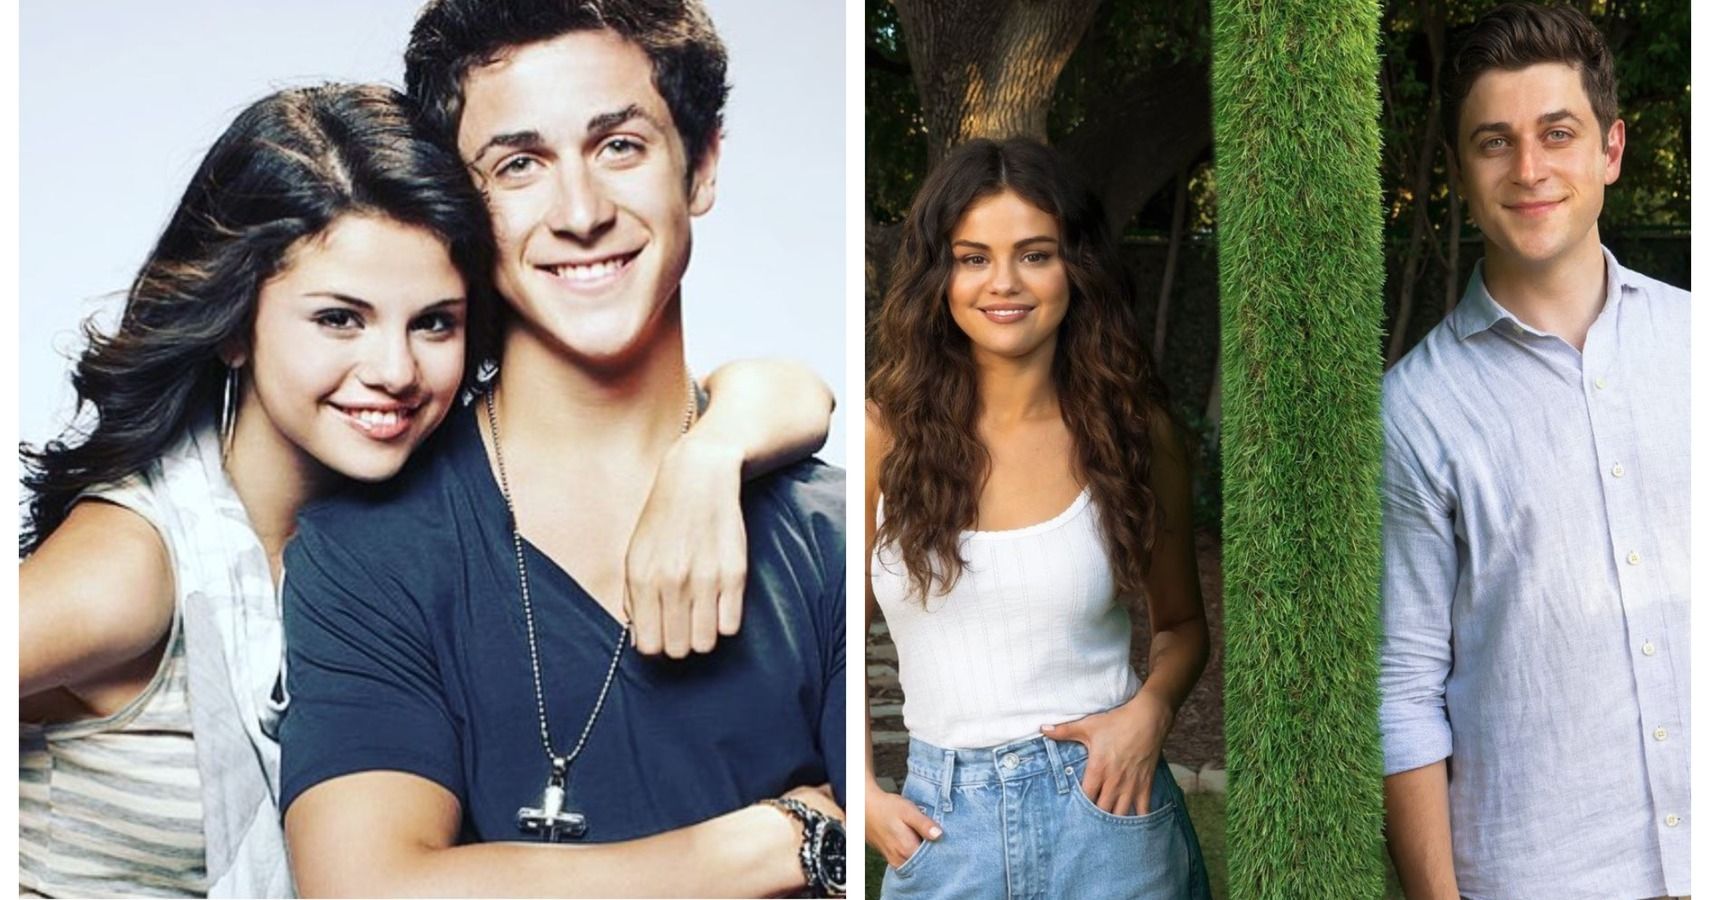 Wizards Of Waverly Place Where Is The Cast Now Thethings